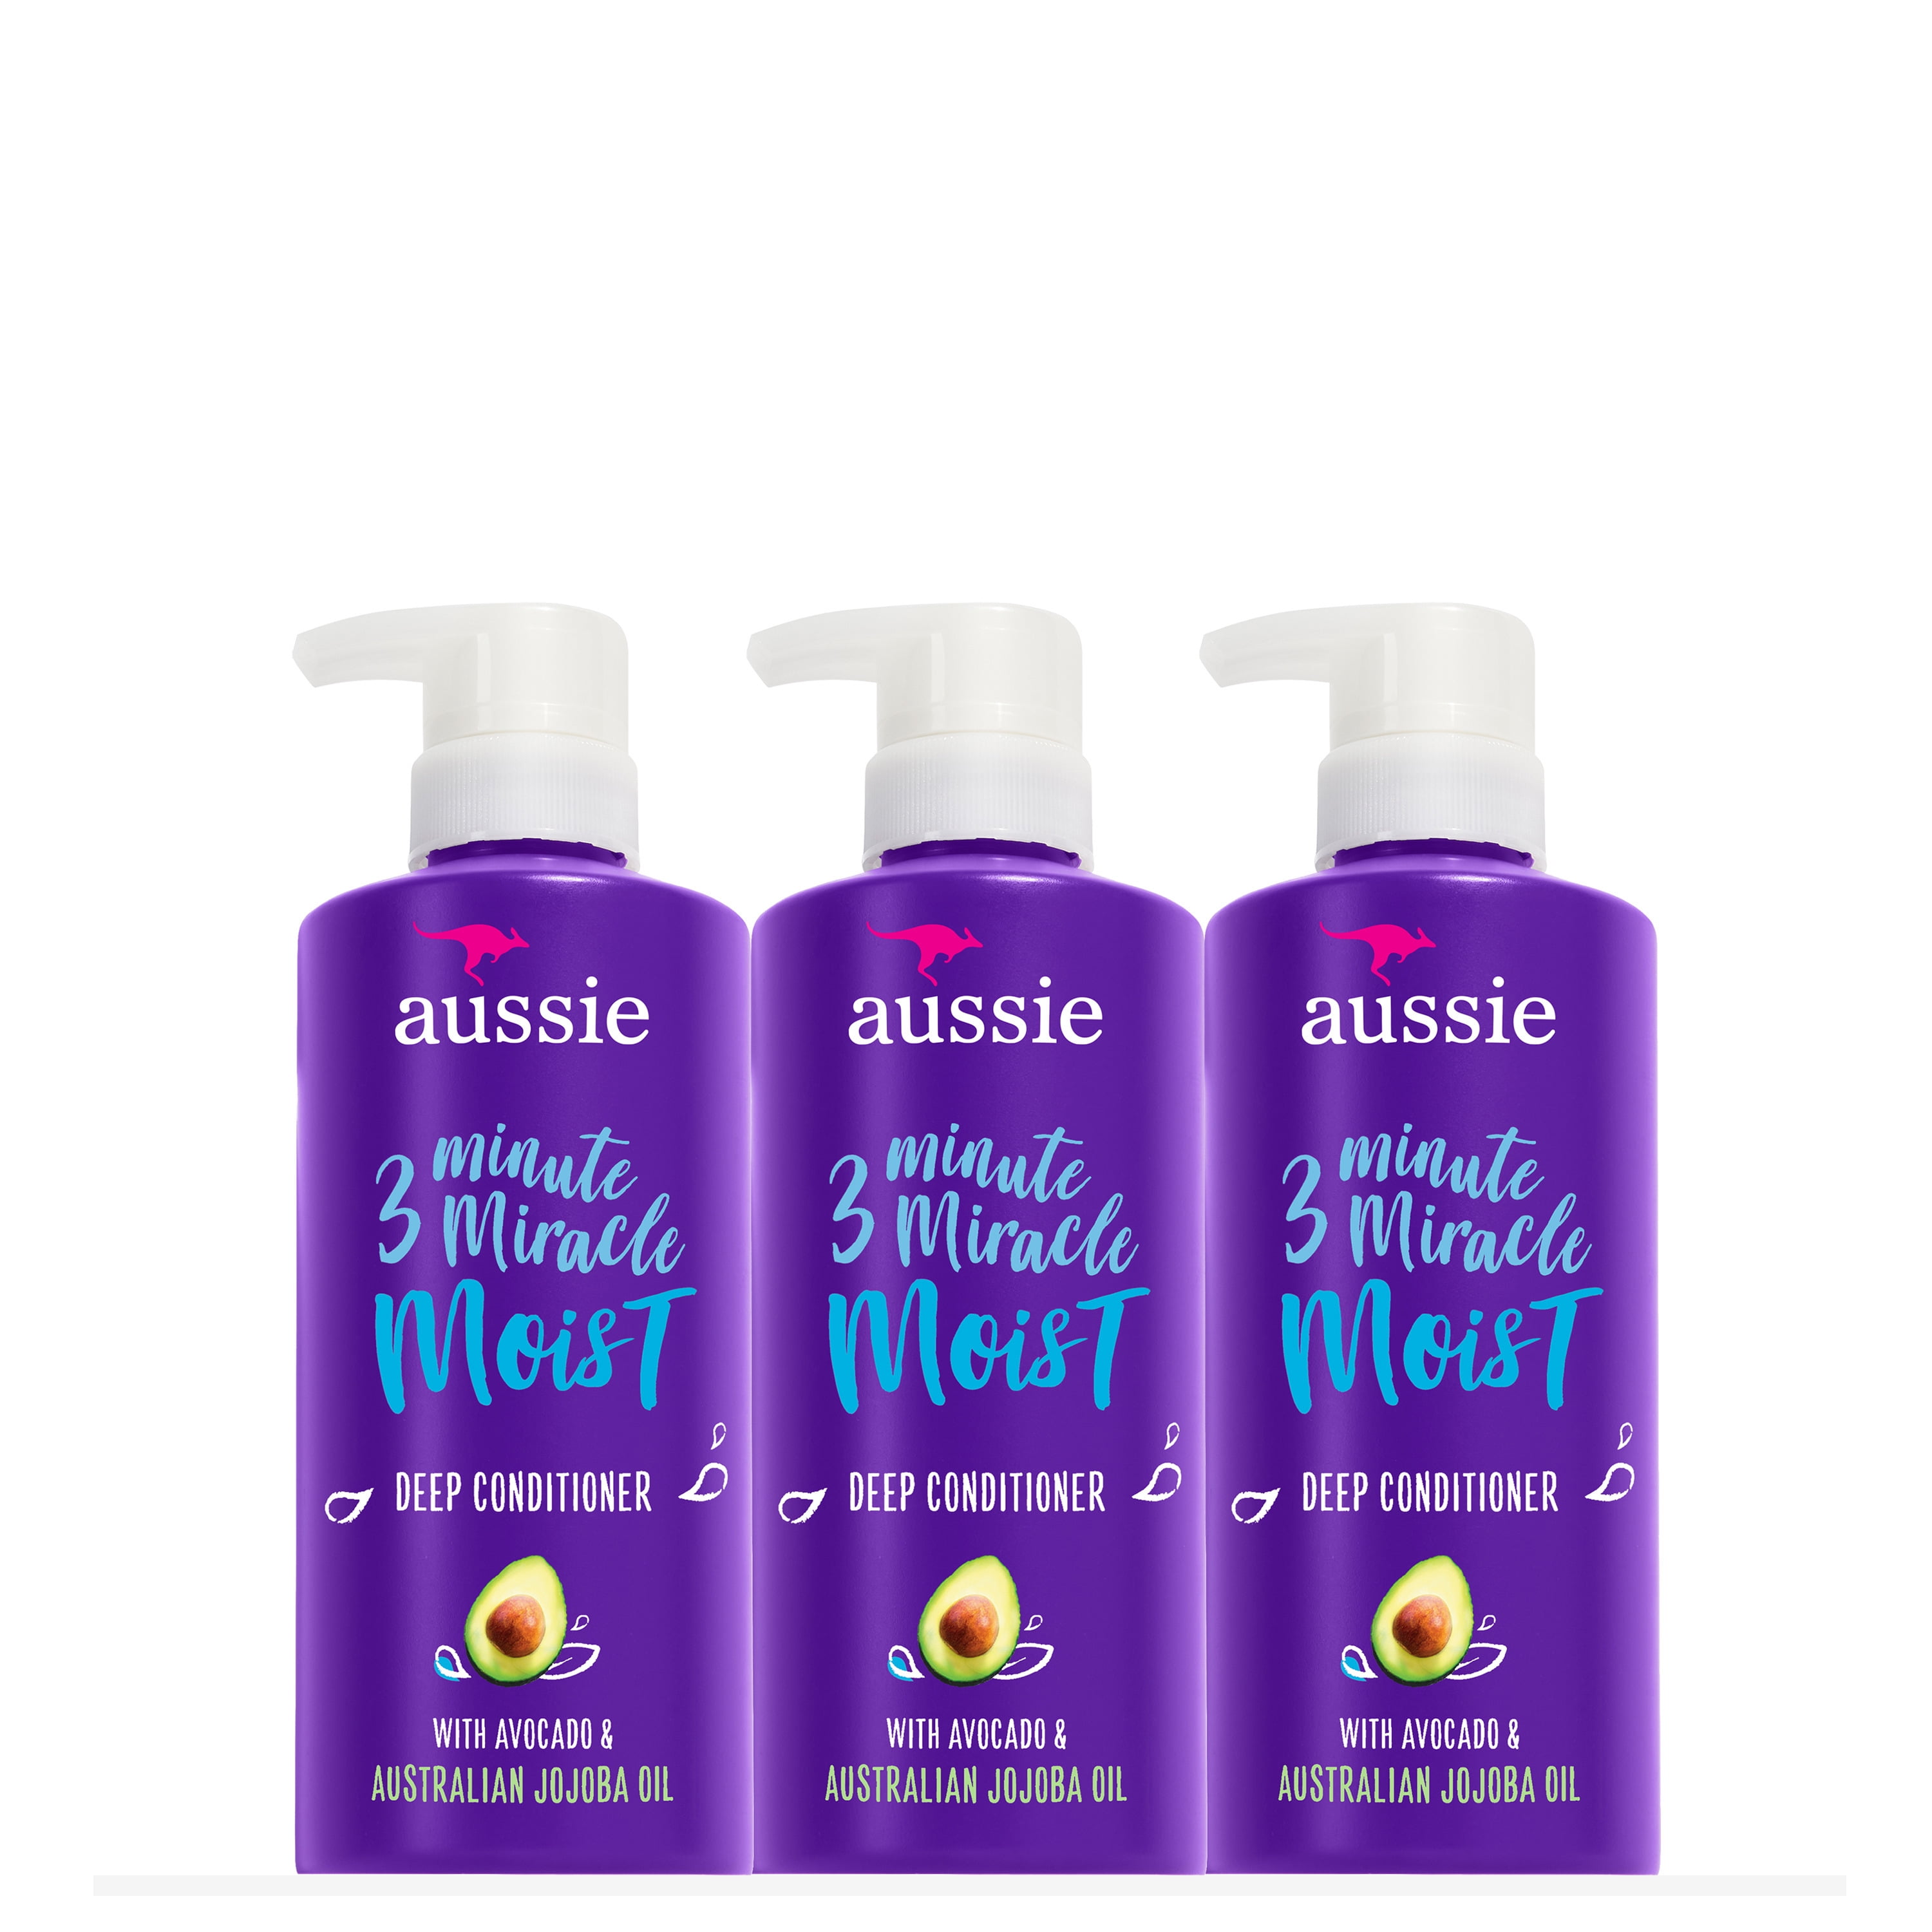 Aussie Paraben-Free Miracle Moist 3 Minute Miracle Conditioner w/ Avocado, 16.0 fl oz, 3 Pack Walmart.com